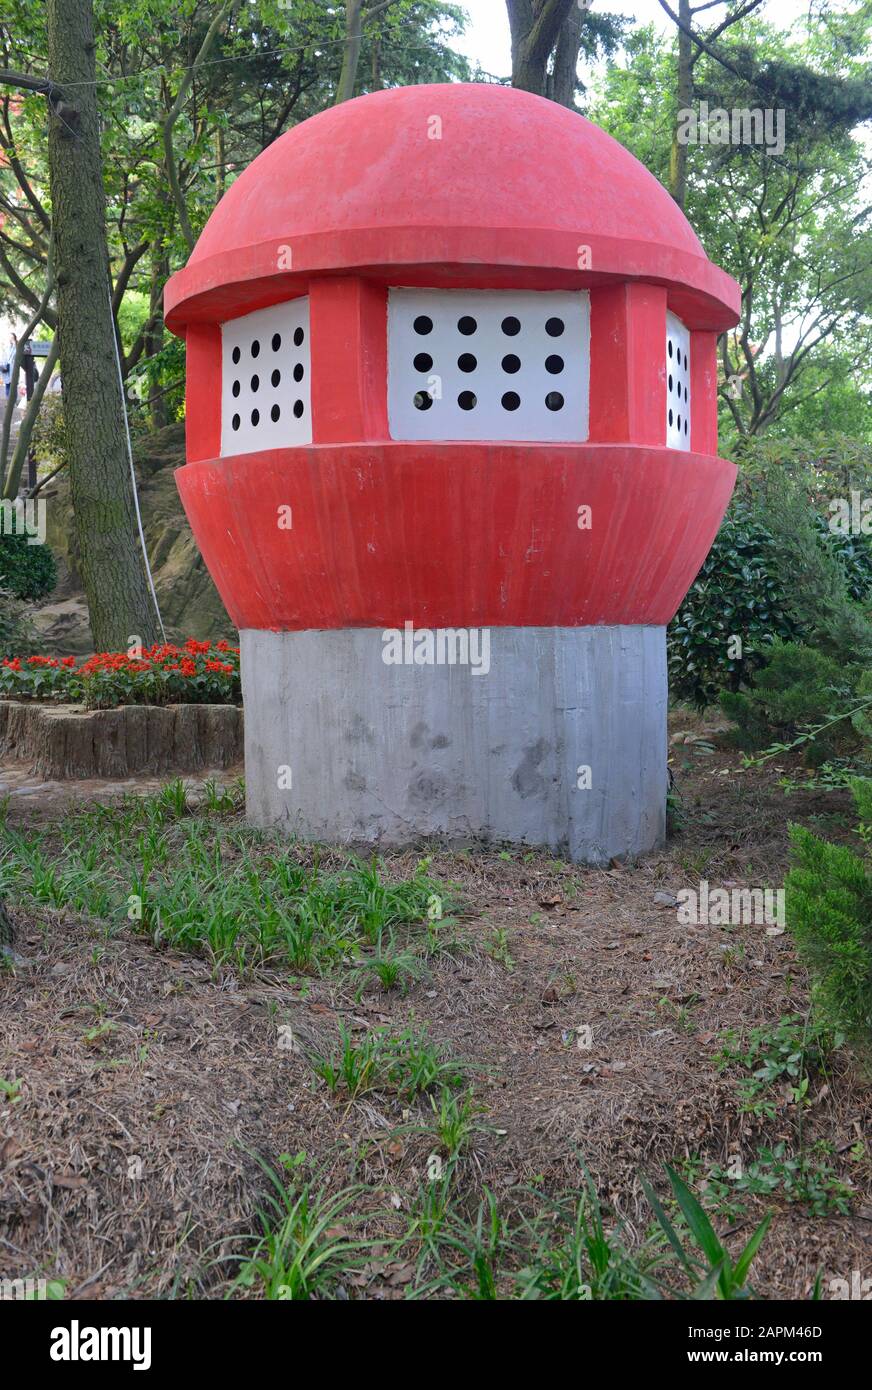 Ventilator shaft in the shape of the mushroom viewing towers in Signal Hill  park in Qingdao, Shandong province, China Stock Photo - Alamy